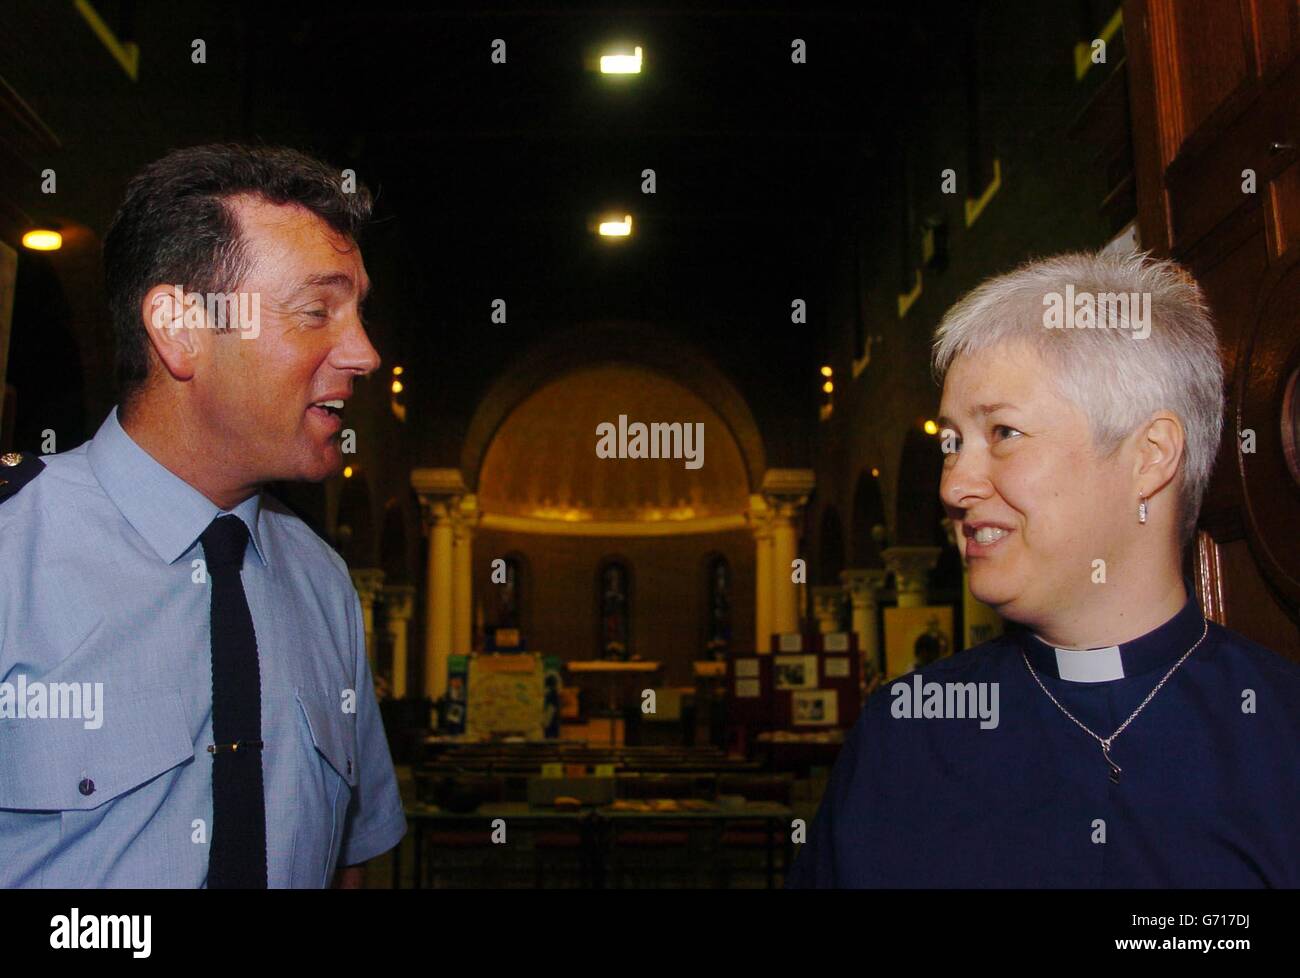 Reverend Katherine Poulton talks with Dave McInerney from Garda Racial & Intercultural Office at The Church of St George & St Thomas on Cathal Brugha Street in Dublin. The Reverend is encouraging immigrants to join her church by hosting various stalls inside the church which look outwards to the far reaches of the world. Stock Photo